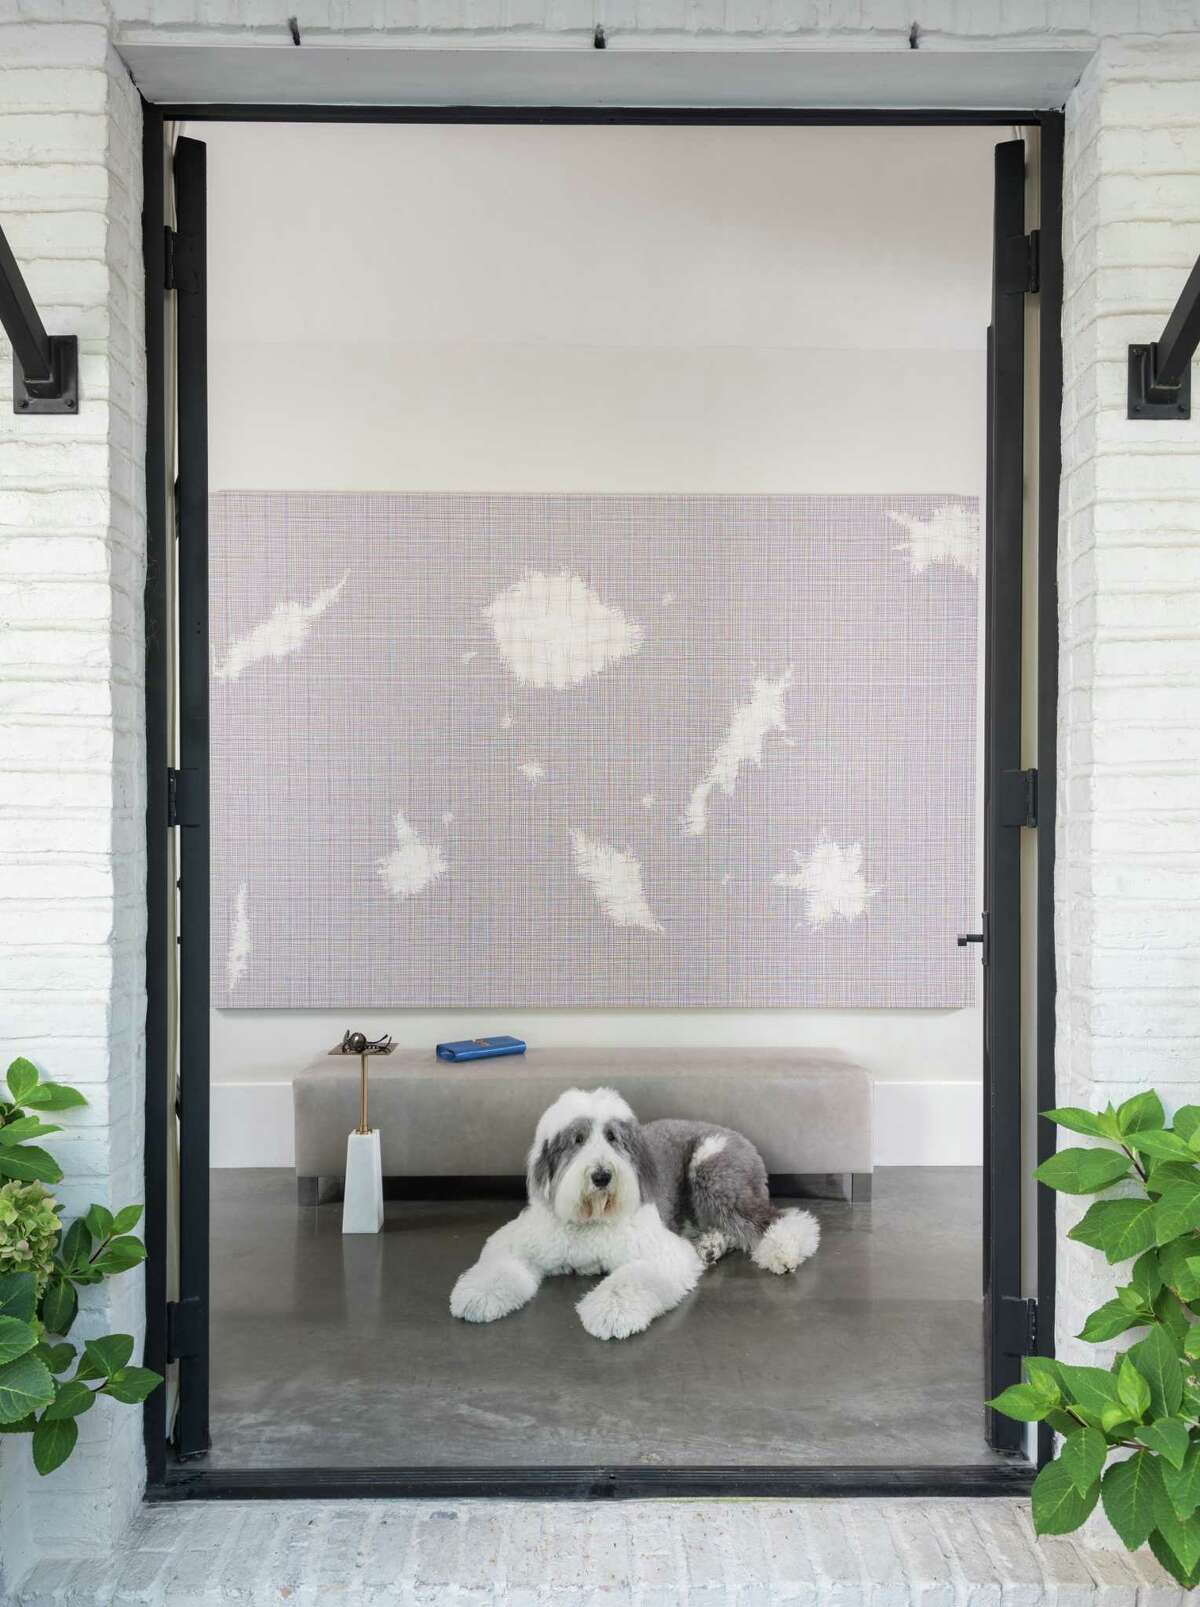 Rocky, the family’s old English sheepdog, greets guests in the foyer.